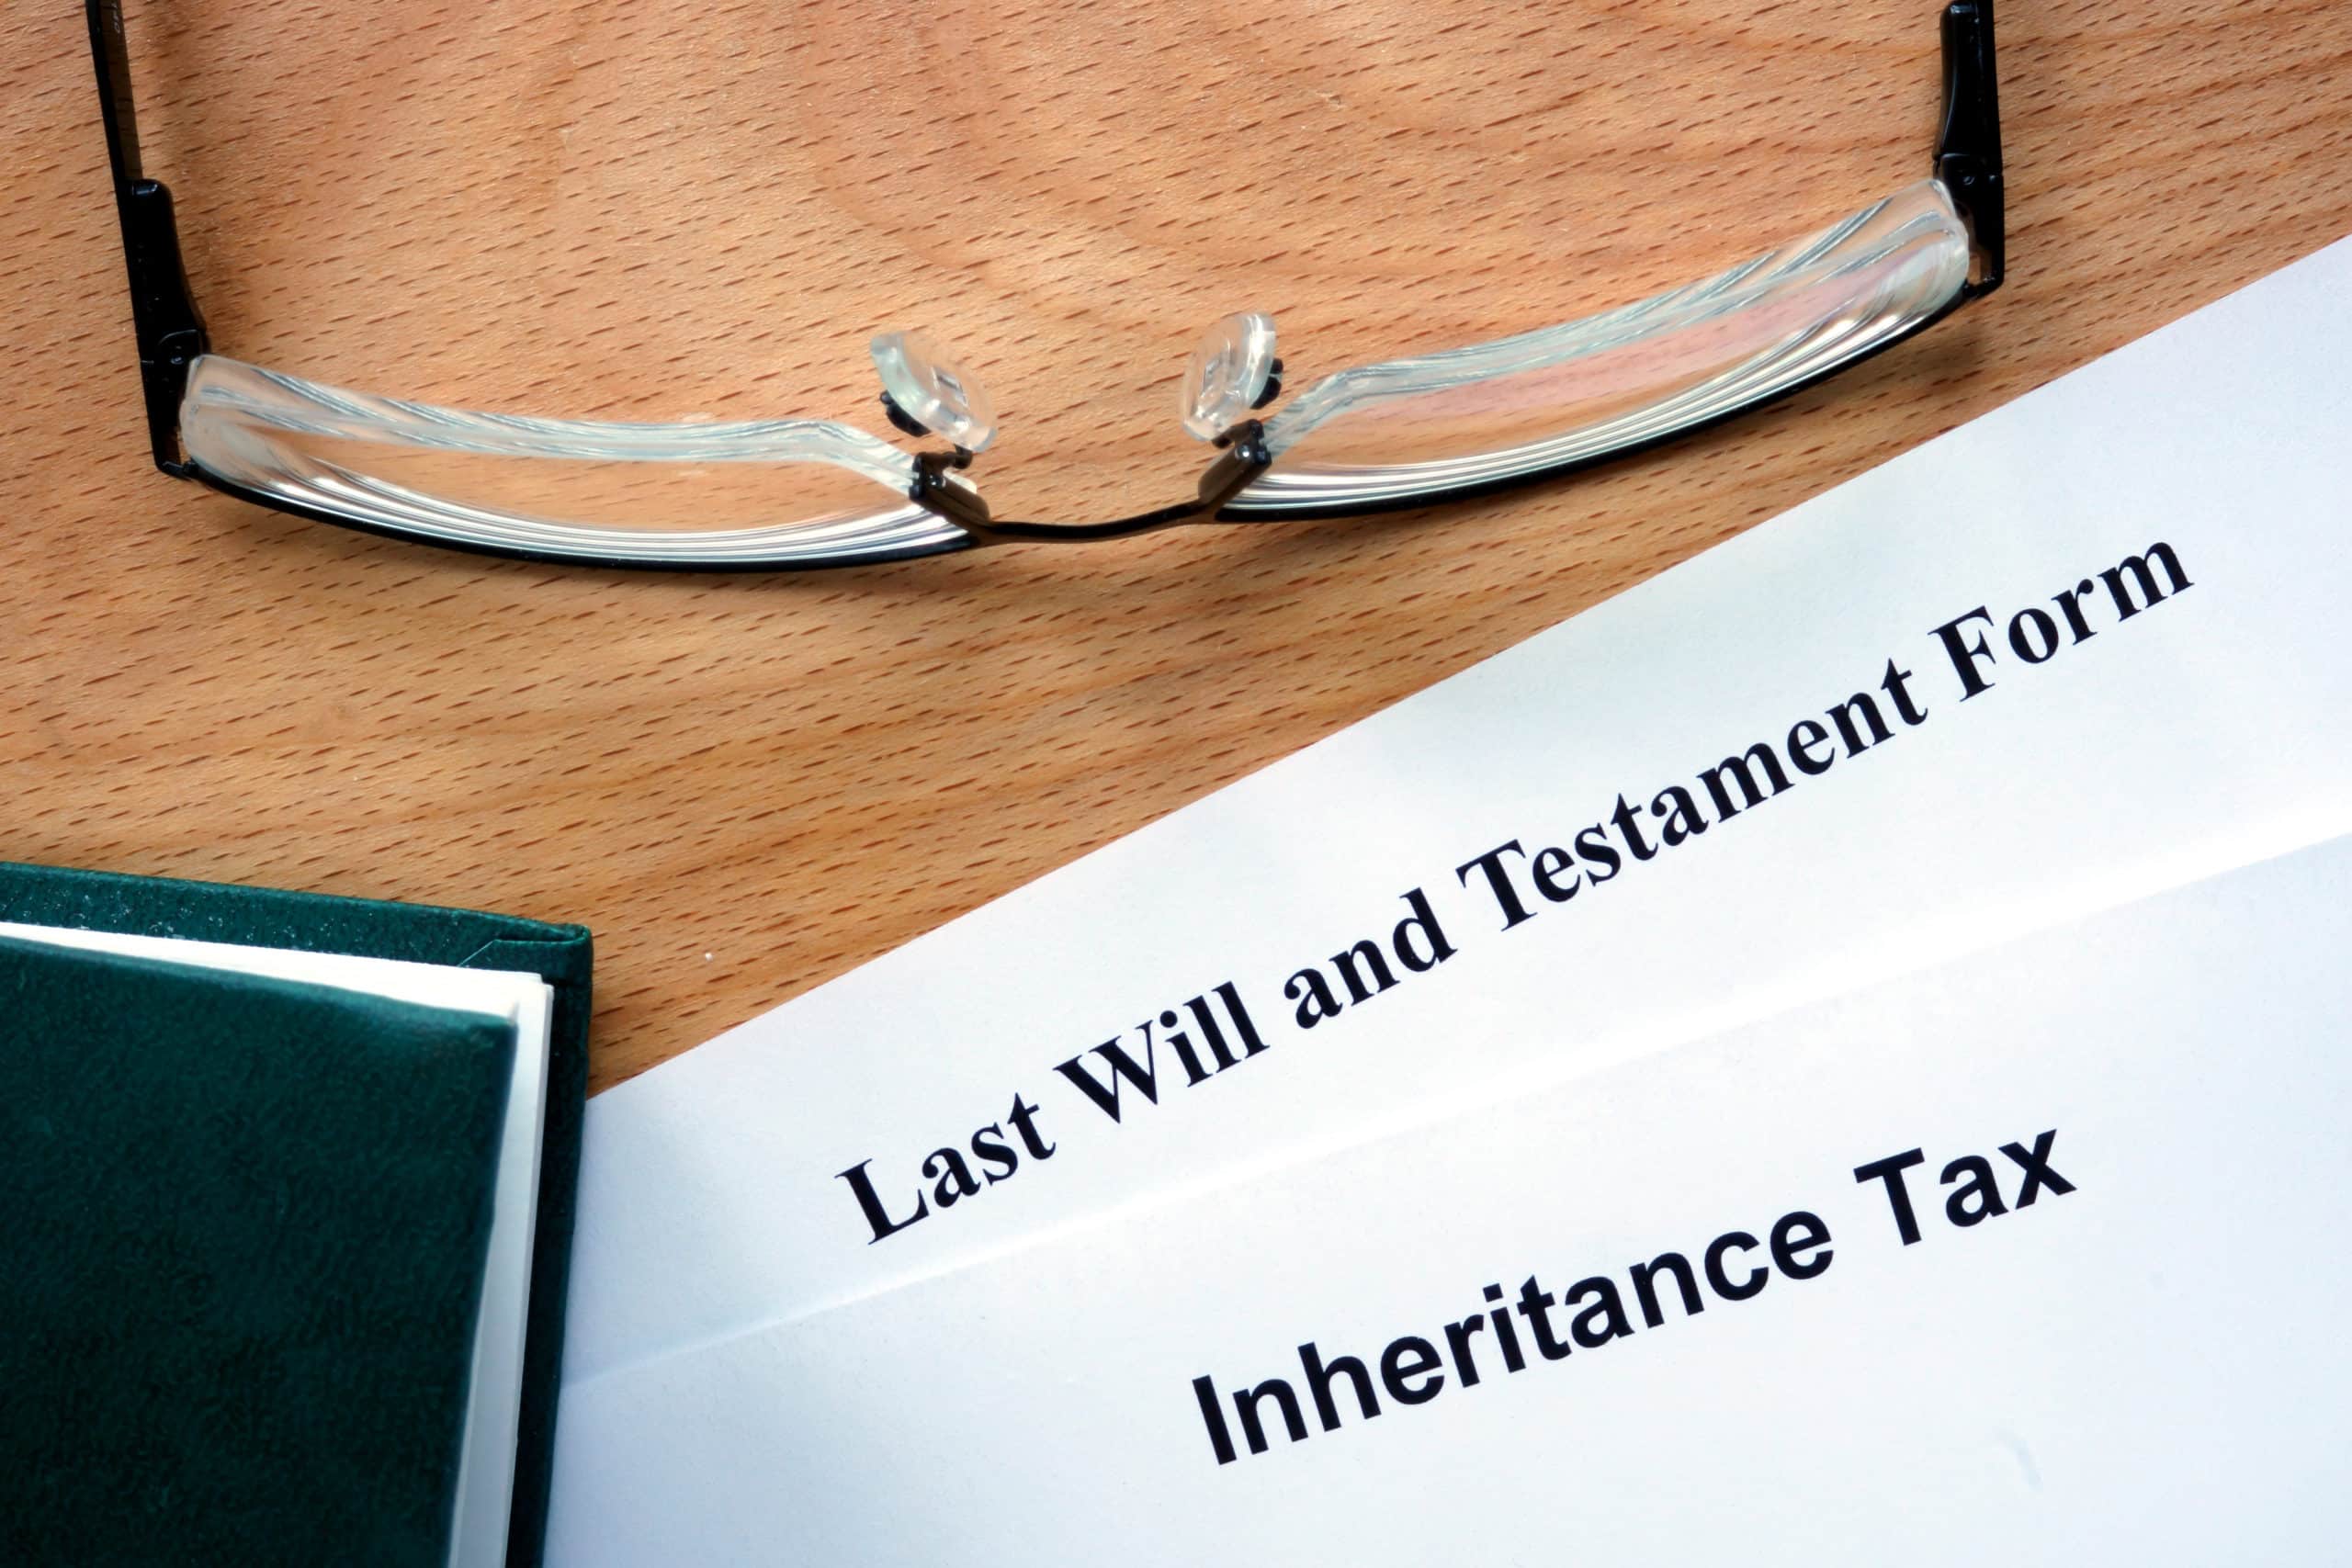 What is the Law of Intestacy?